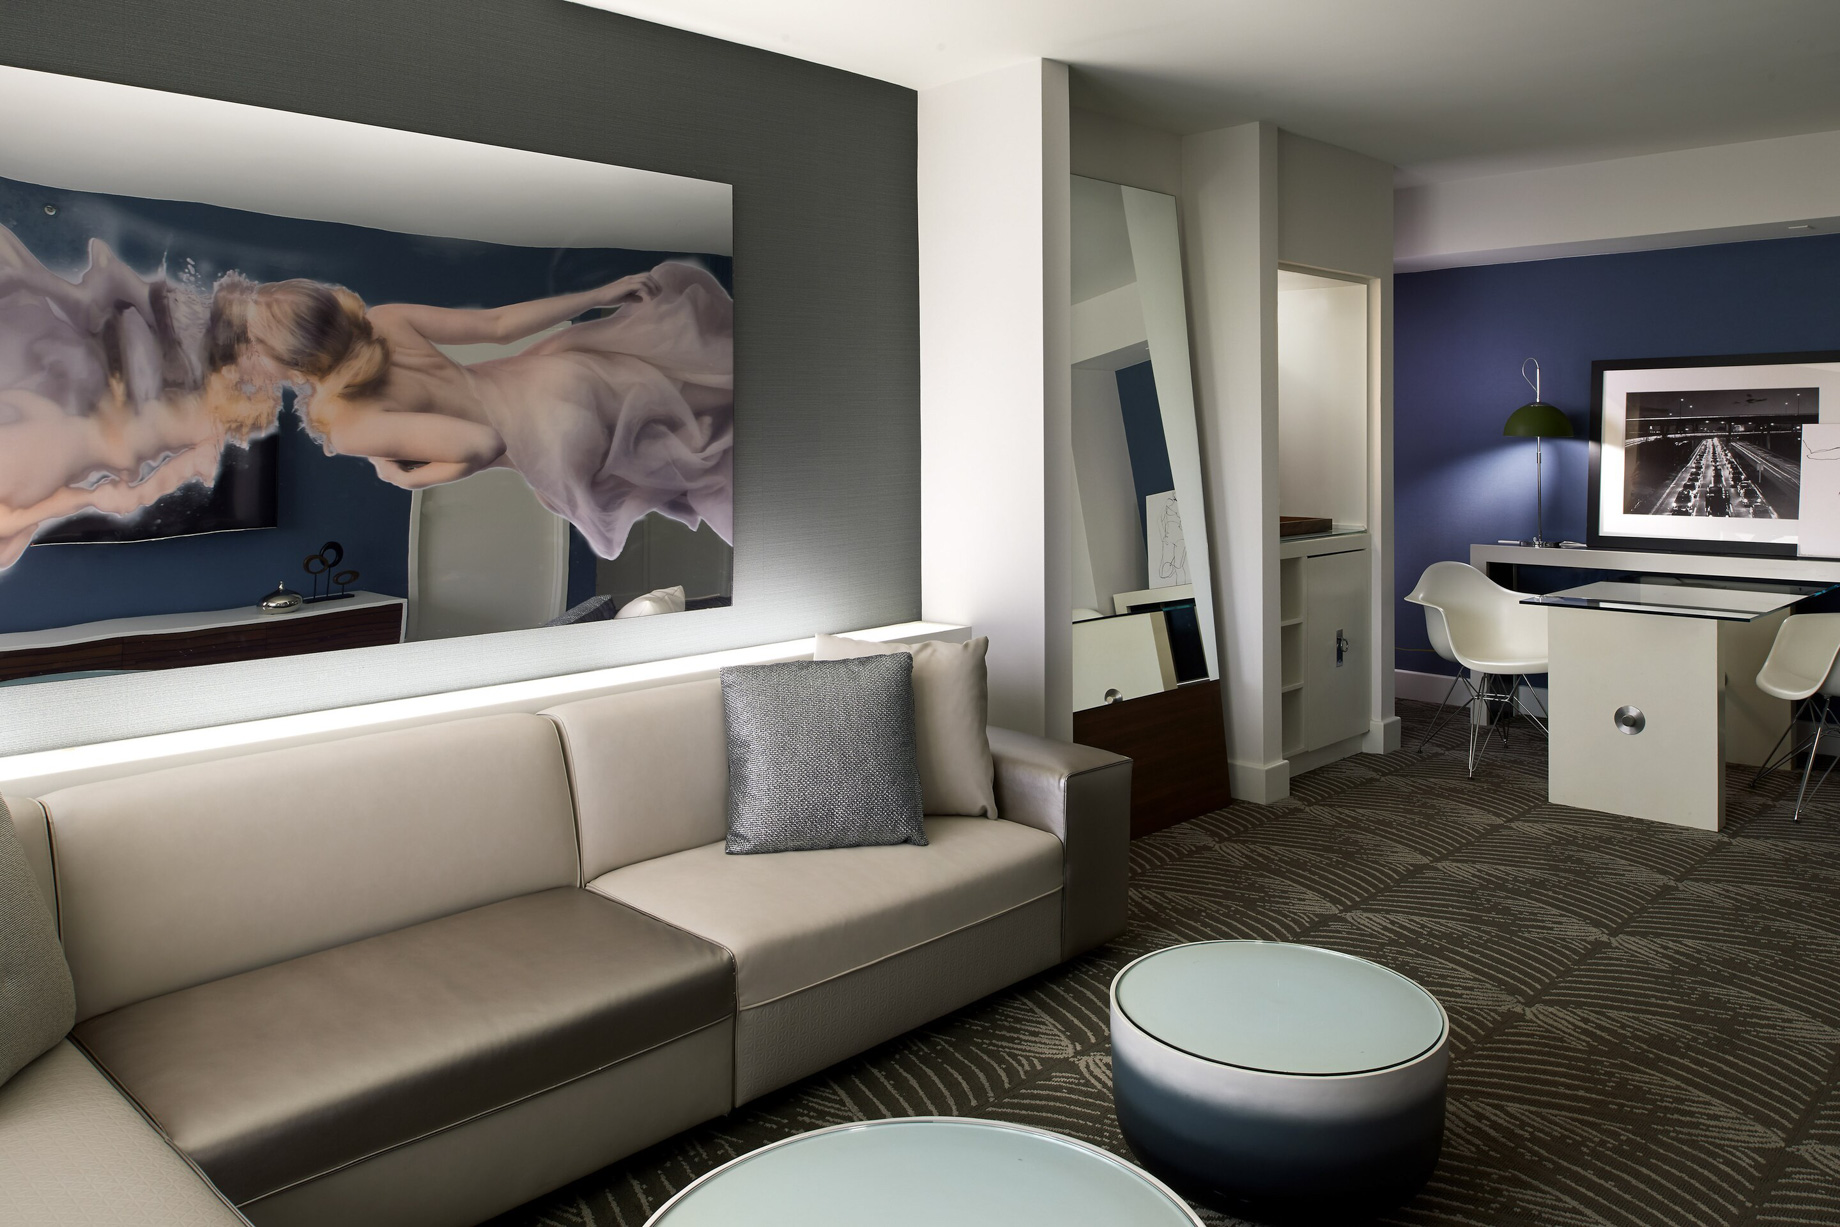 W Los Angeles West Beverly Hills Hotel – Los Angeles, CA, USA – Spectacular Suite Living Room